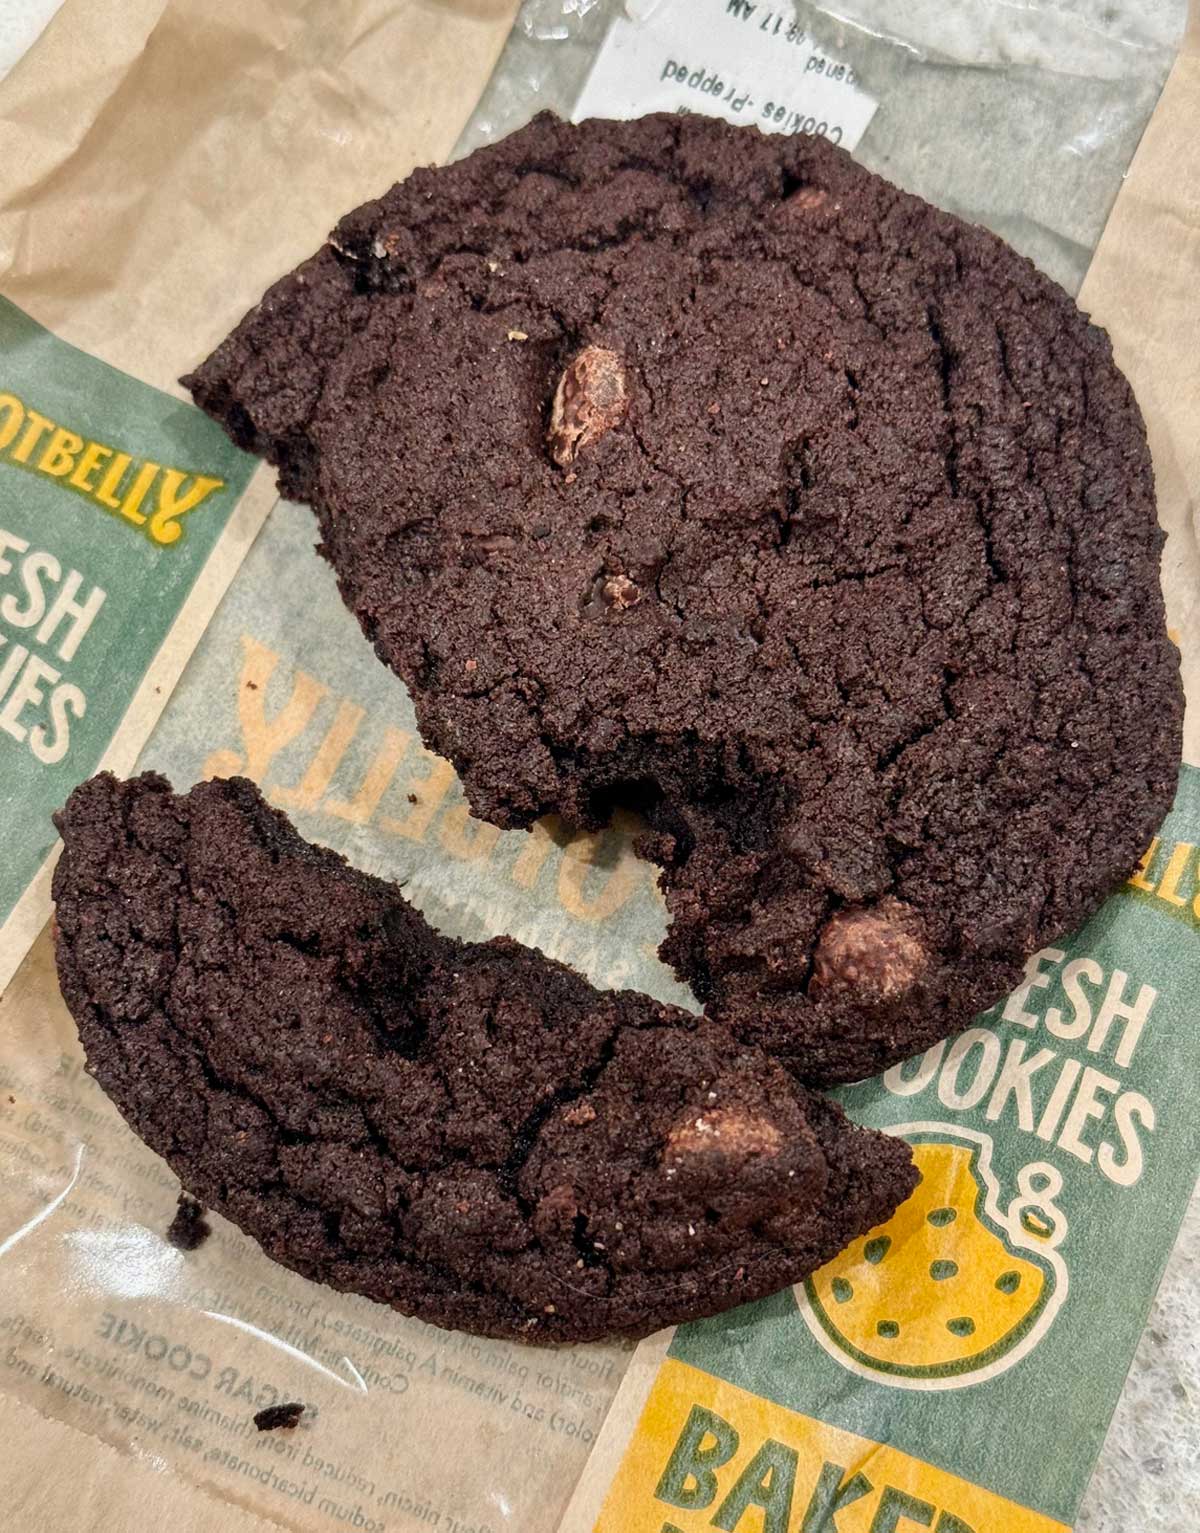 A big soft chocolate brownie cookie from Potbelly